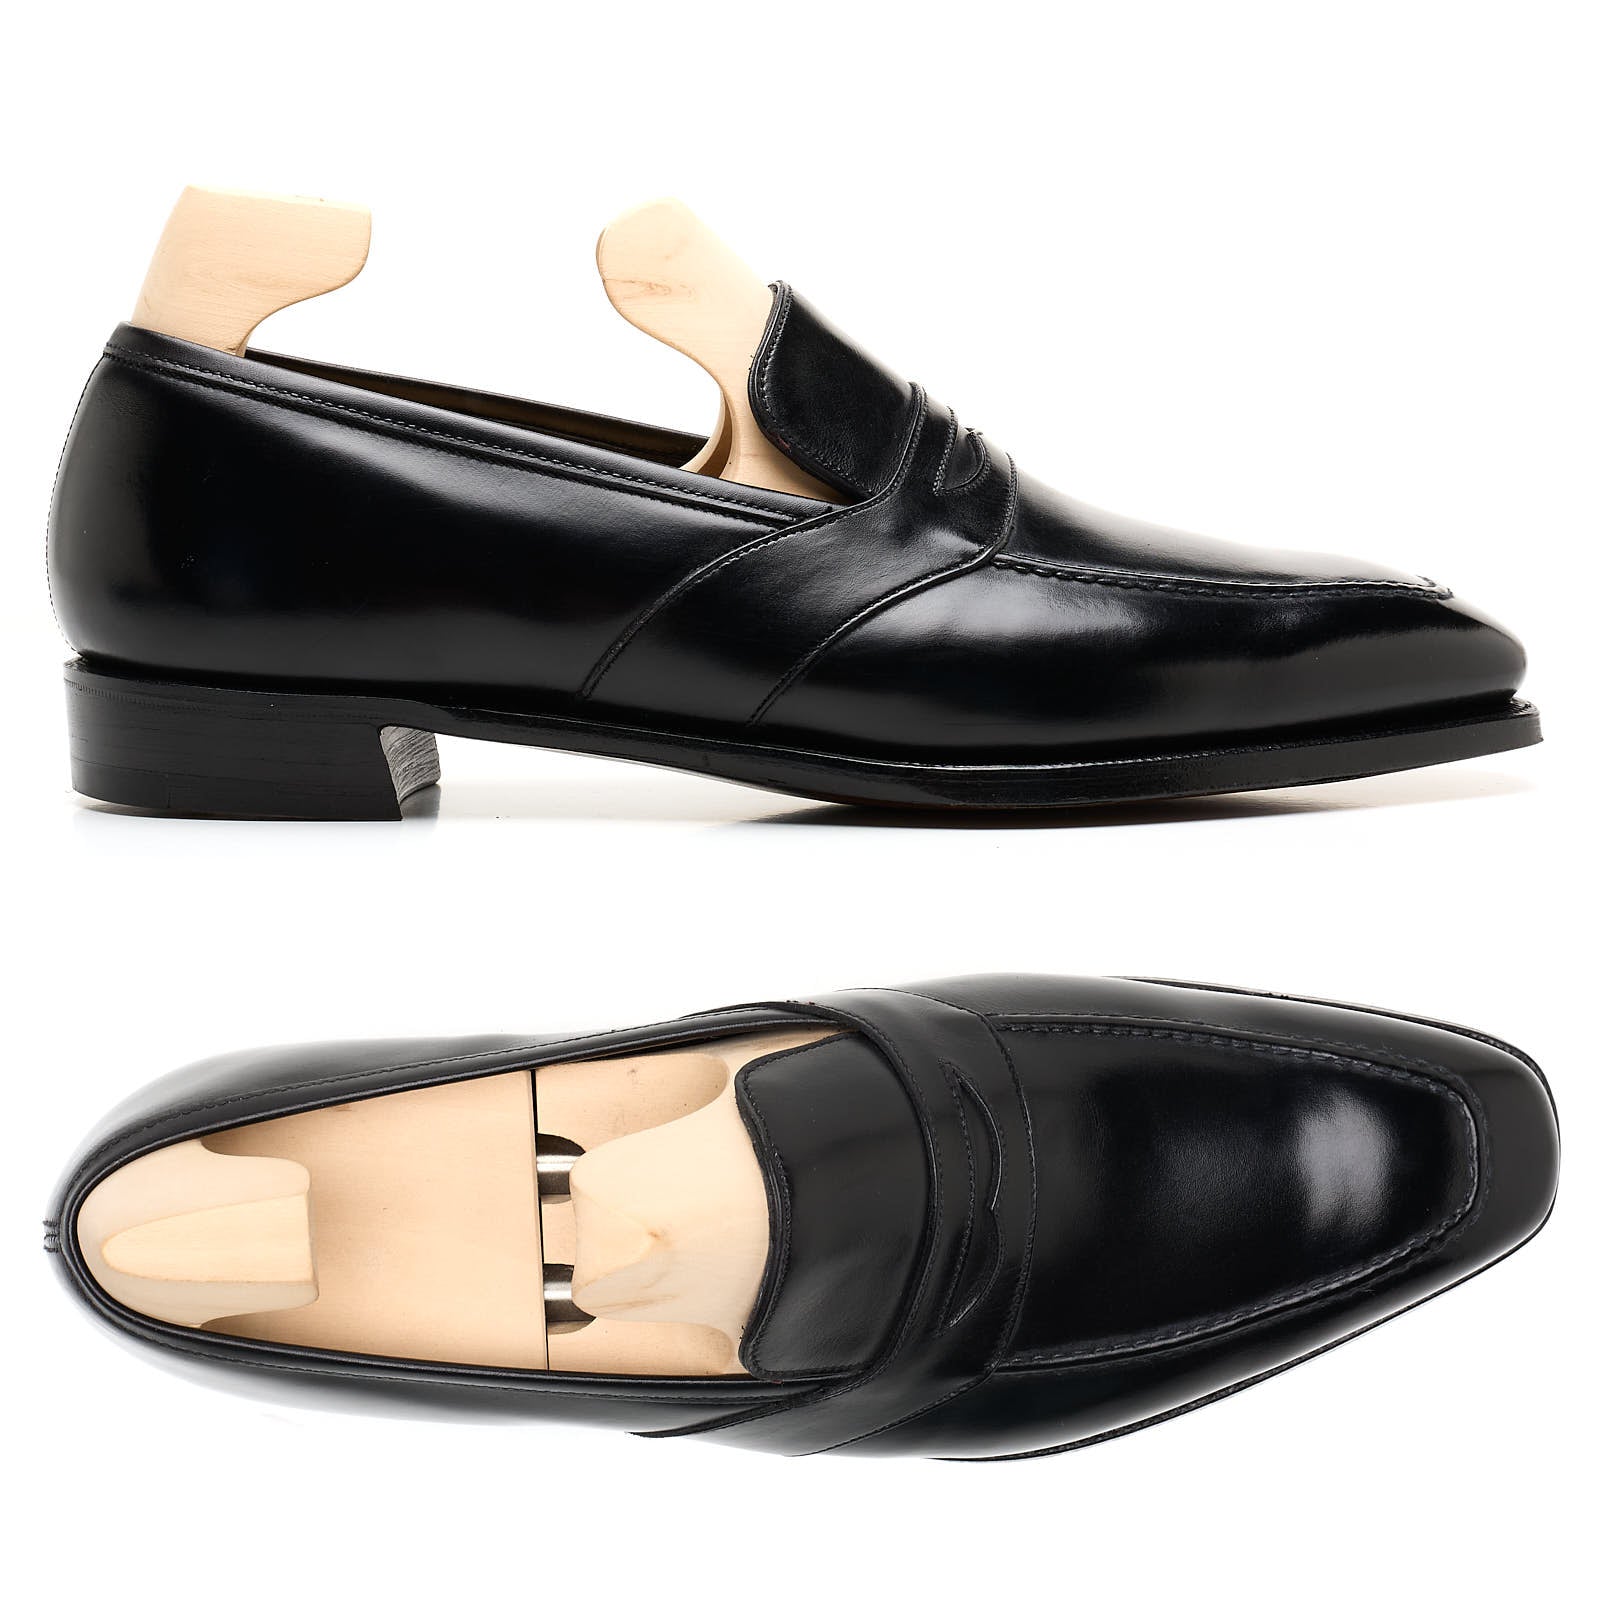 GEORGE CLEVERLEY "Bradley" Black Leather Loafers Dress Shoes UK 7.5 NEW US 8